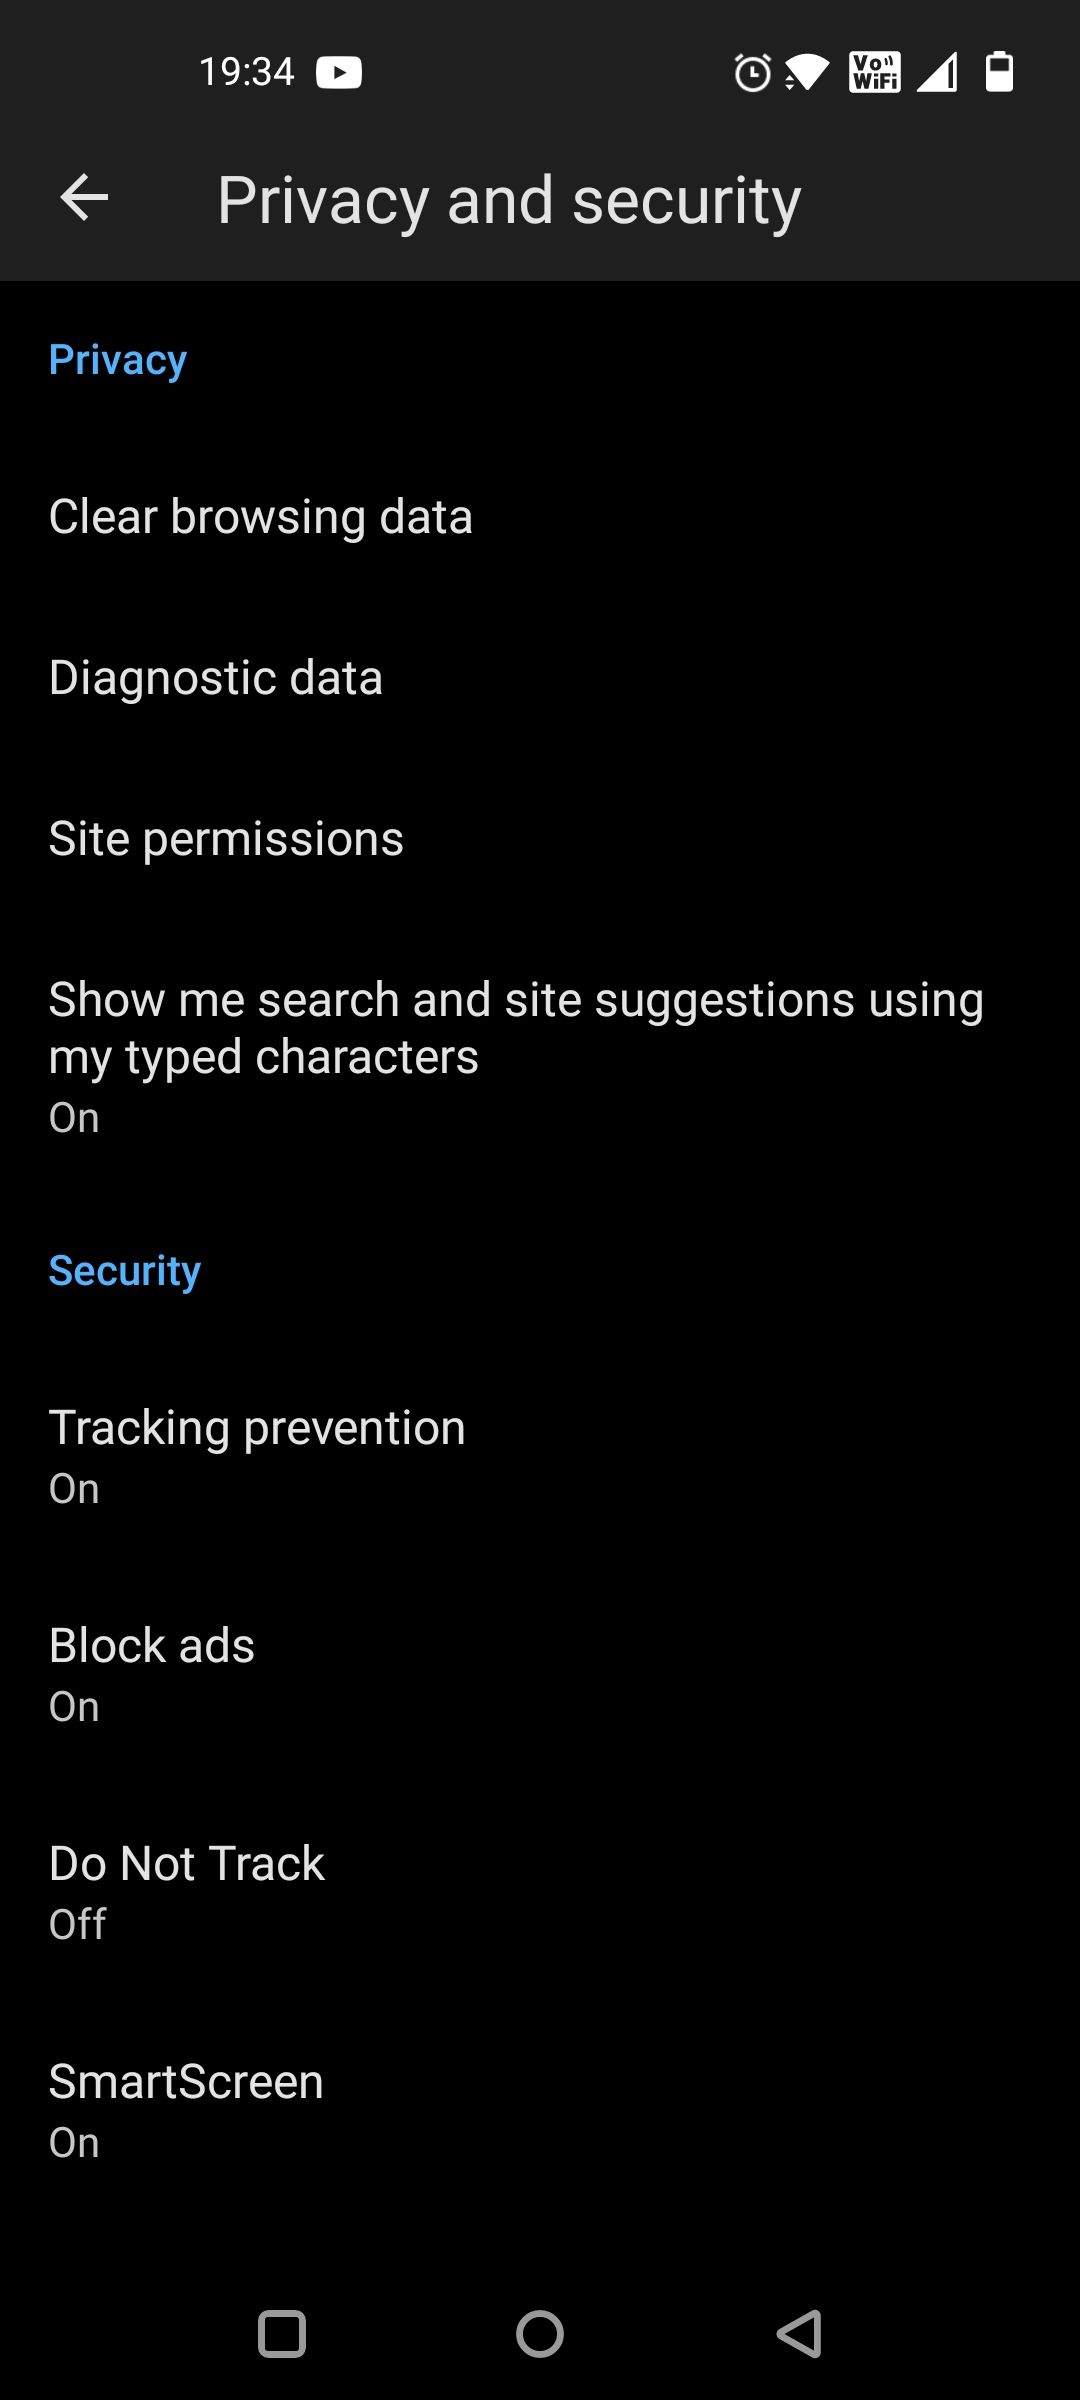 2.Privacy-and-Security-Settings-Showing-Block Ads-On